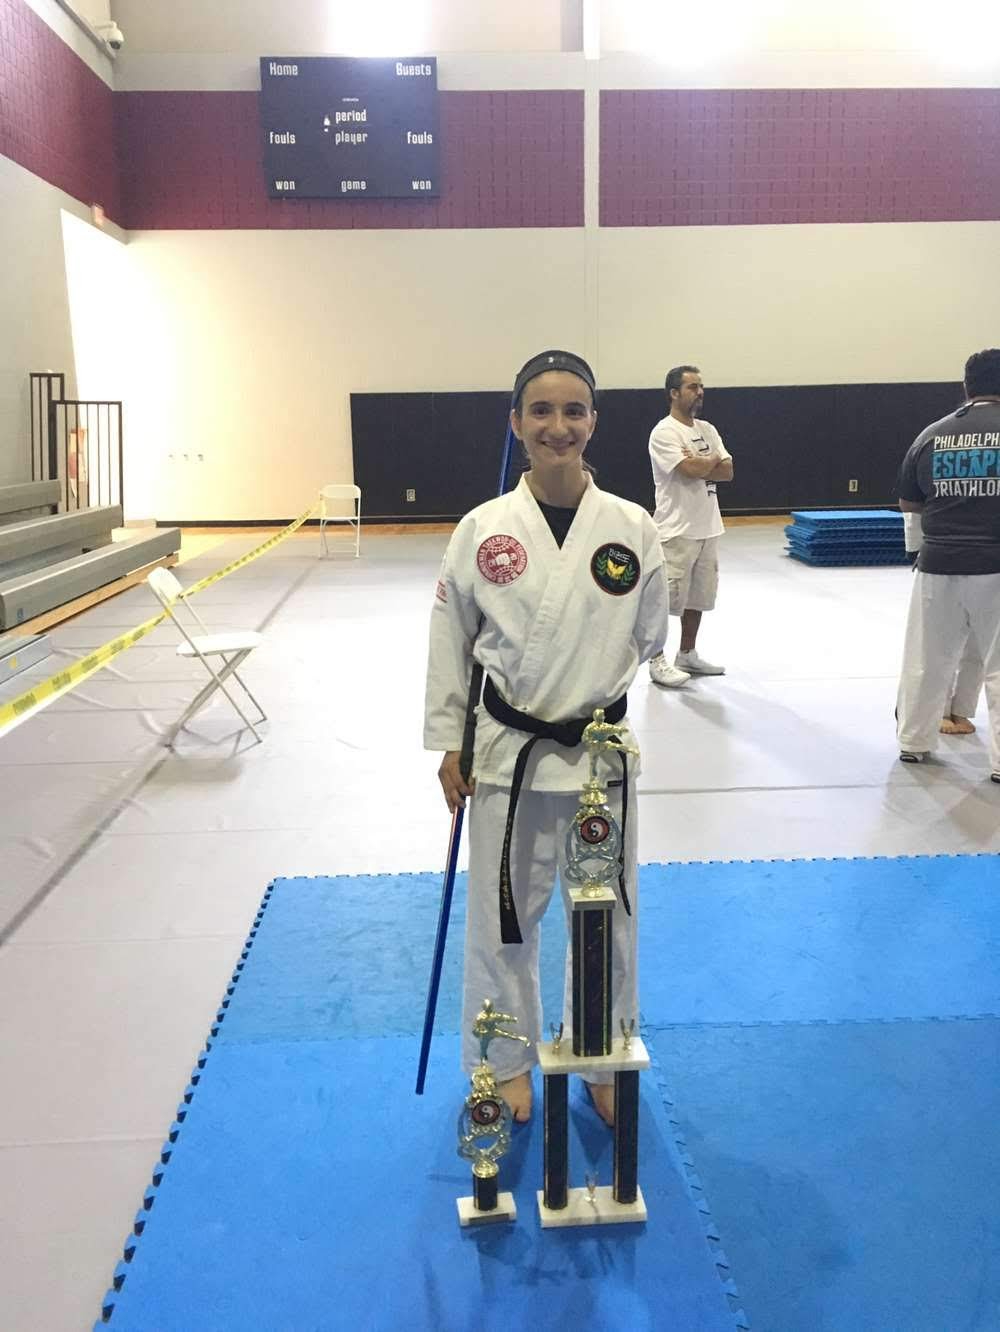 Maria Lattanze at a karate tournament taking home first place in weapons and third place in forms